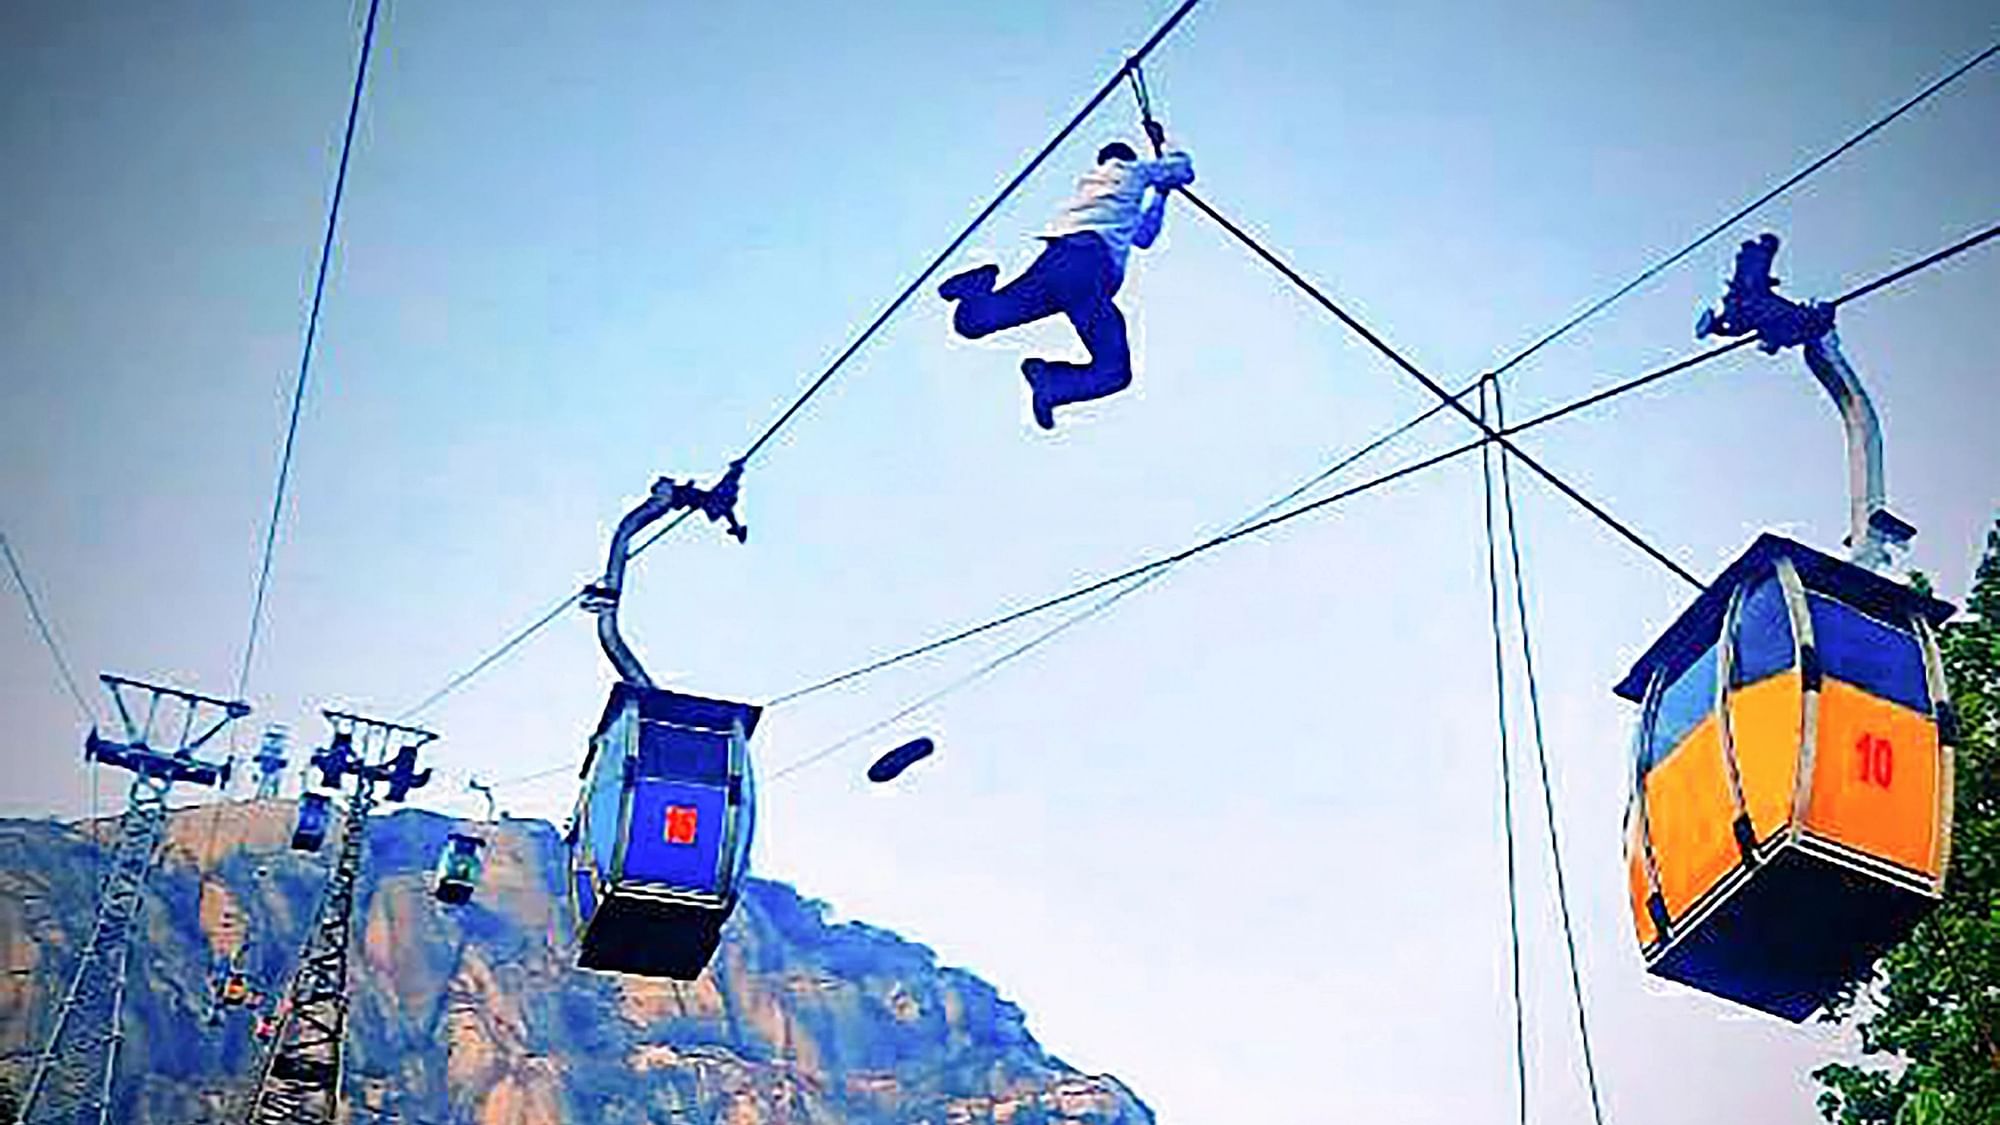 Jharkhand Cable Car Accident An Audit Report Had Advised 'Close Watch